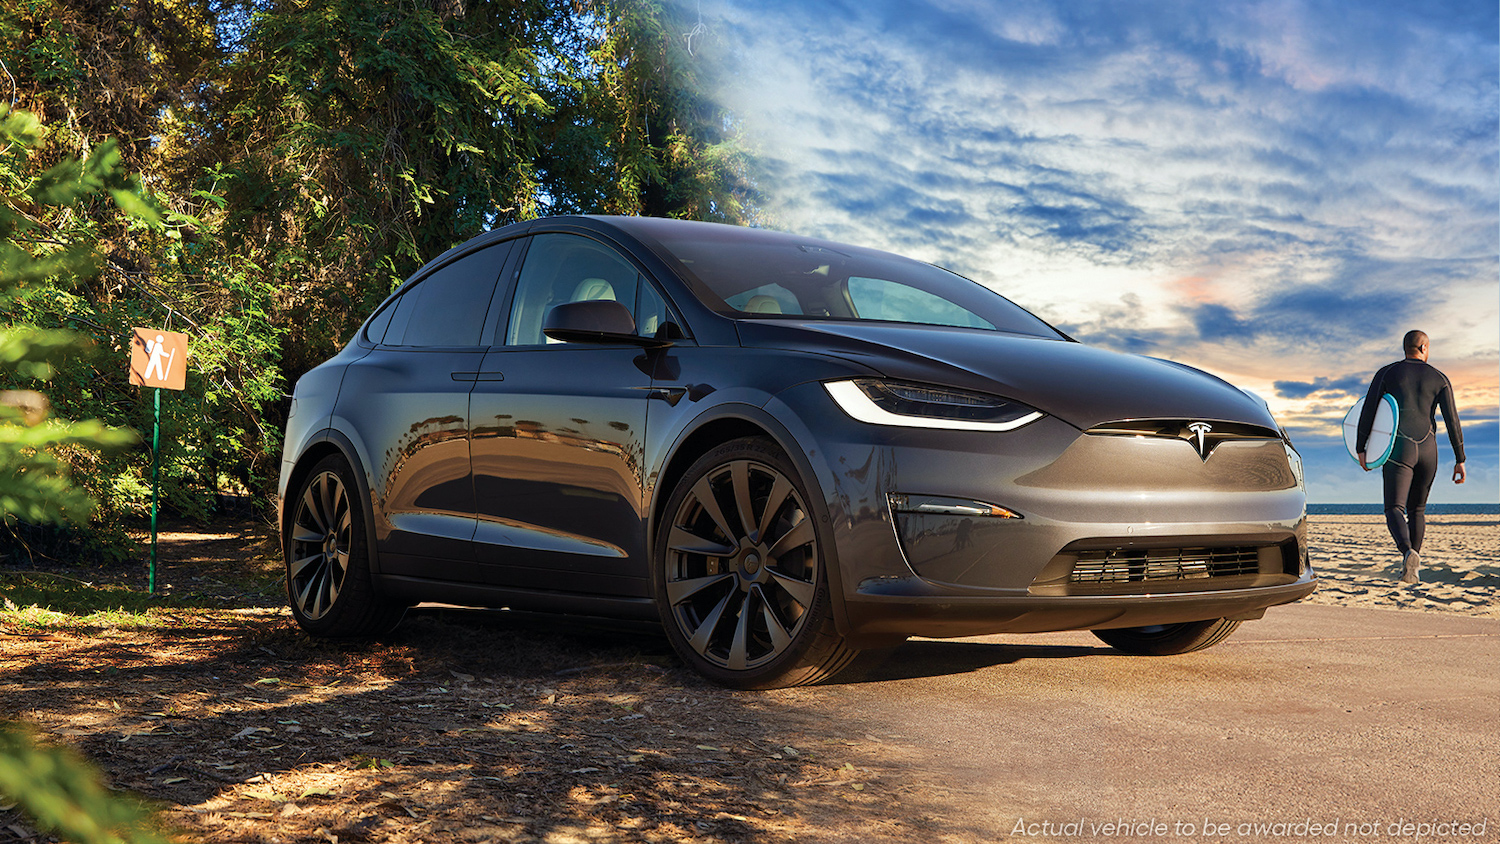 A Tesla Model X Plaid sitting on a path next to a sandy beach with a surfer in the background